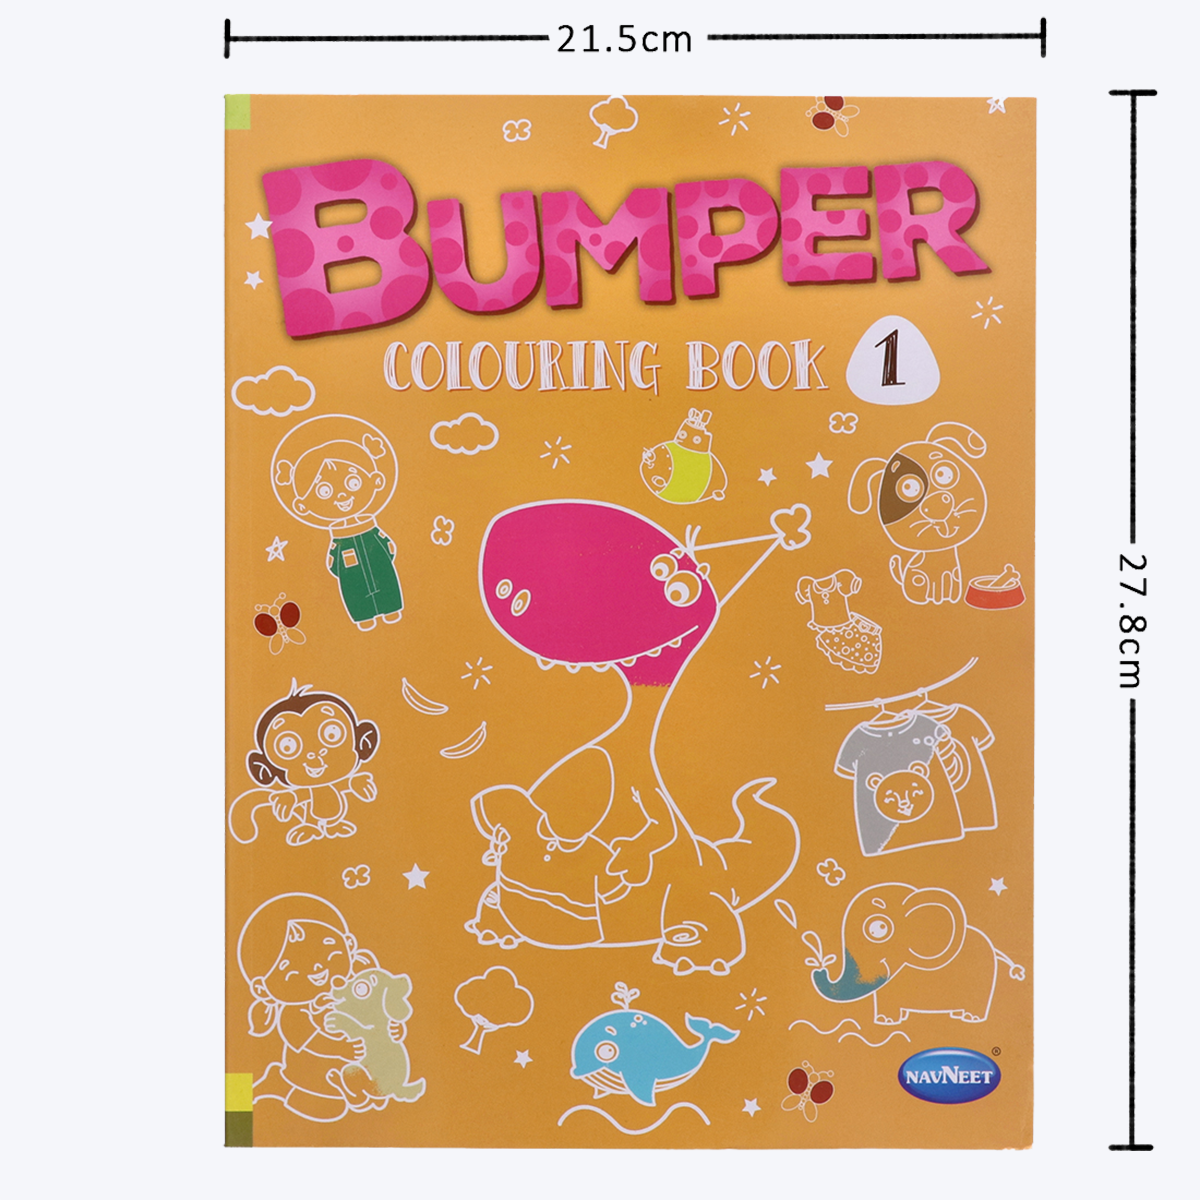 Navneet Bumper Colouring Book - 1 Best for Children Activity Youva Stationery- Crayon Colouring